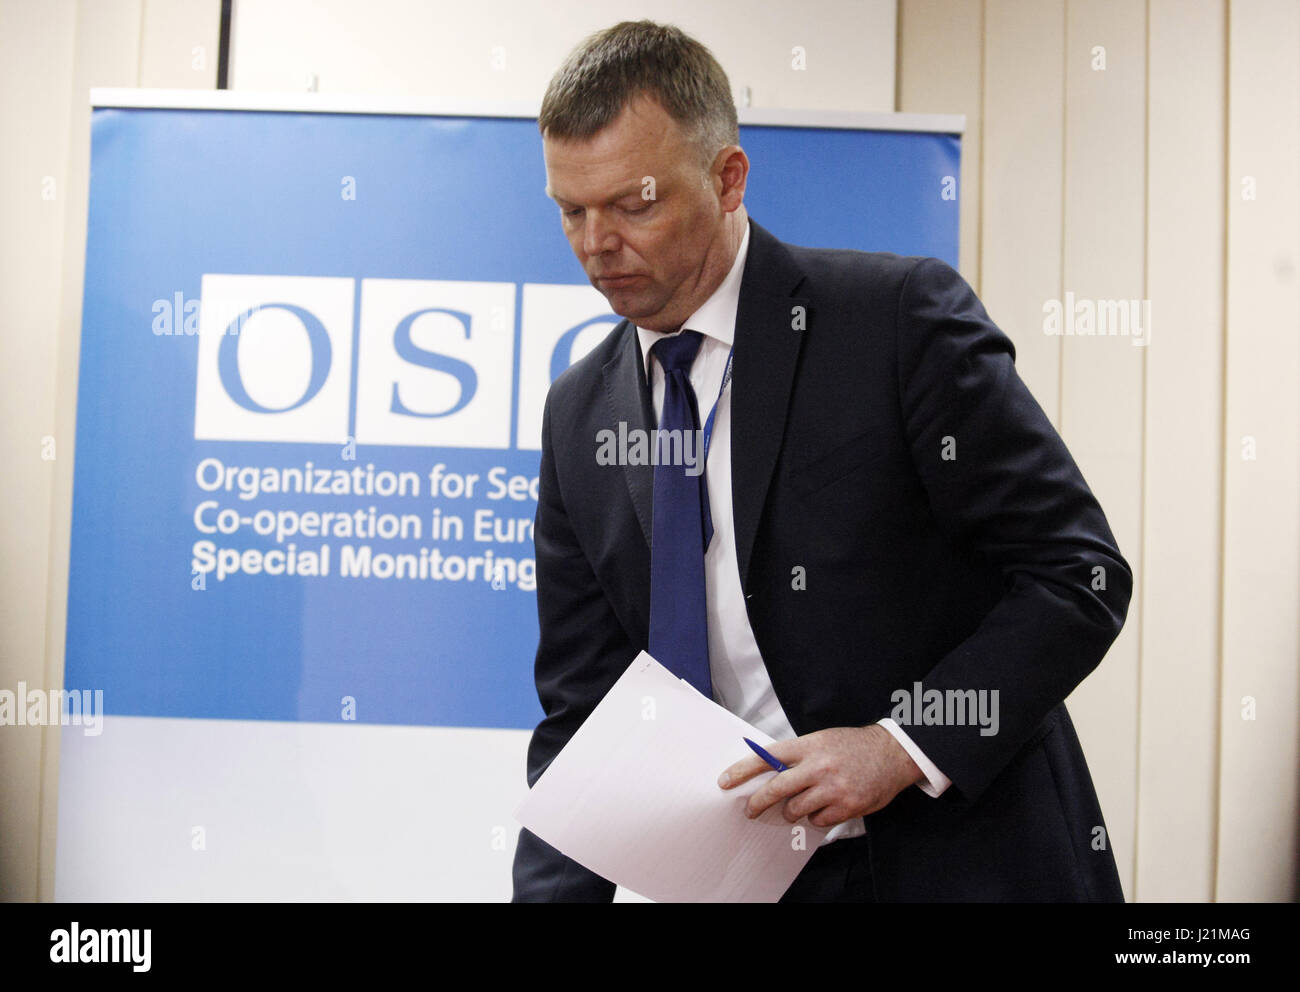 Kiev, Ukraine. 23rd Apr, 2017. The deputy head of the OSCE monitoring mission in Ukraine ALEXANDER HUG leaves his a press-conference in Kiev, Ukraine, on 23 April 2017. The Organization for Security and Co-operation in Europe said Sunday one of its US monitors in Ukraine died, after a patrol vehicle hit a landmine in the Russian-backed separatist East. It marked the first loss for the security body's Special Monitoring Mission (SMM) since Europe's only war broke out about three years ago. Credit: Serg Glovny/ZUMA Wire/Alamy Live News Stock Photo